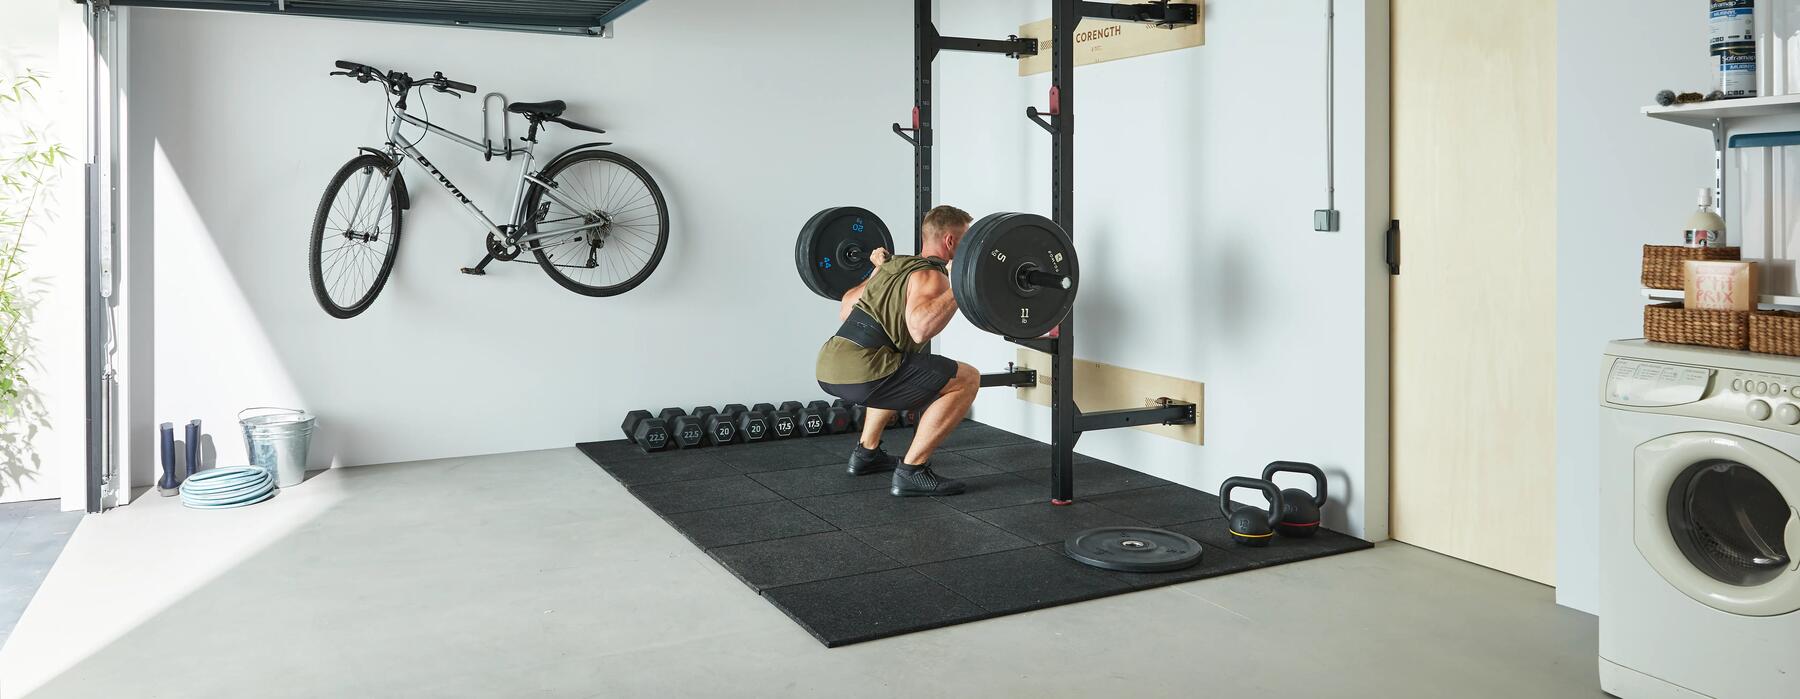 Weightlifting using a Barbell in a garage home gym